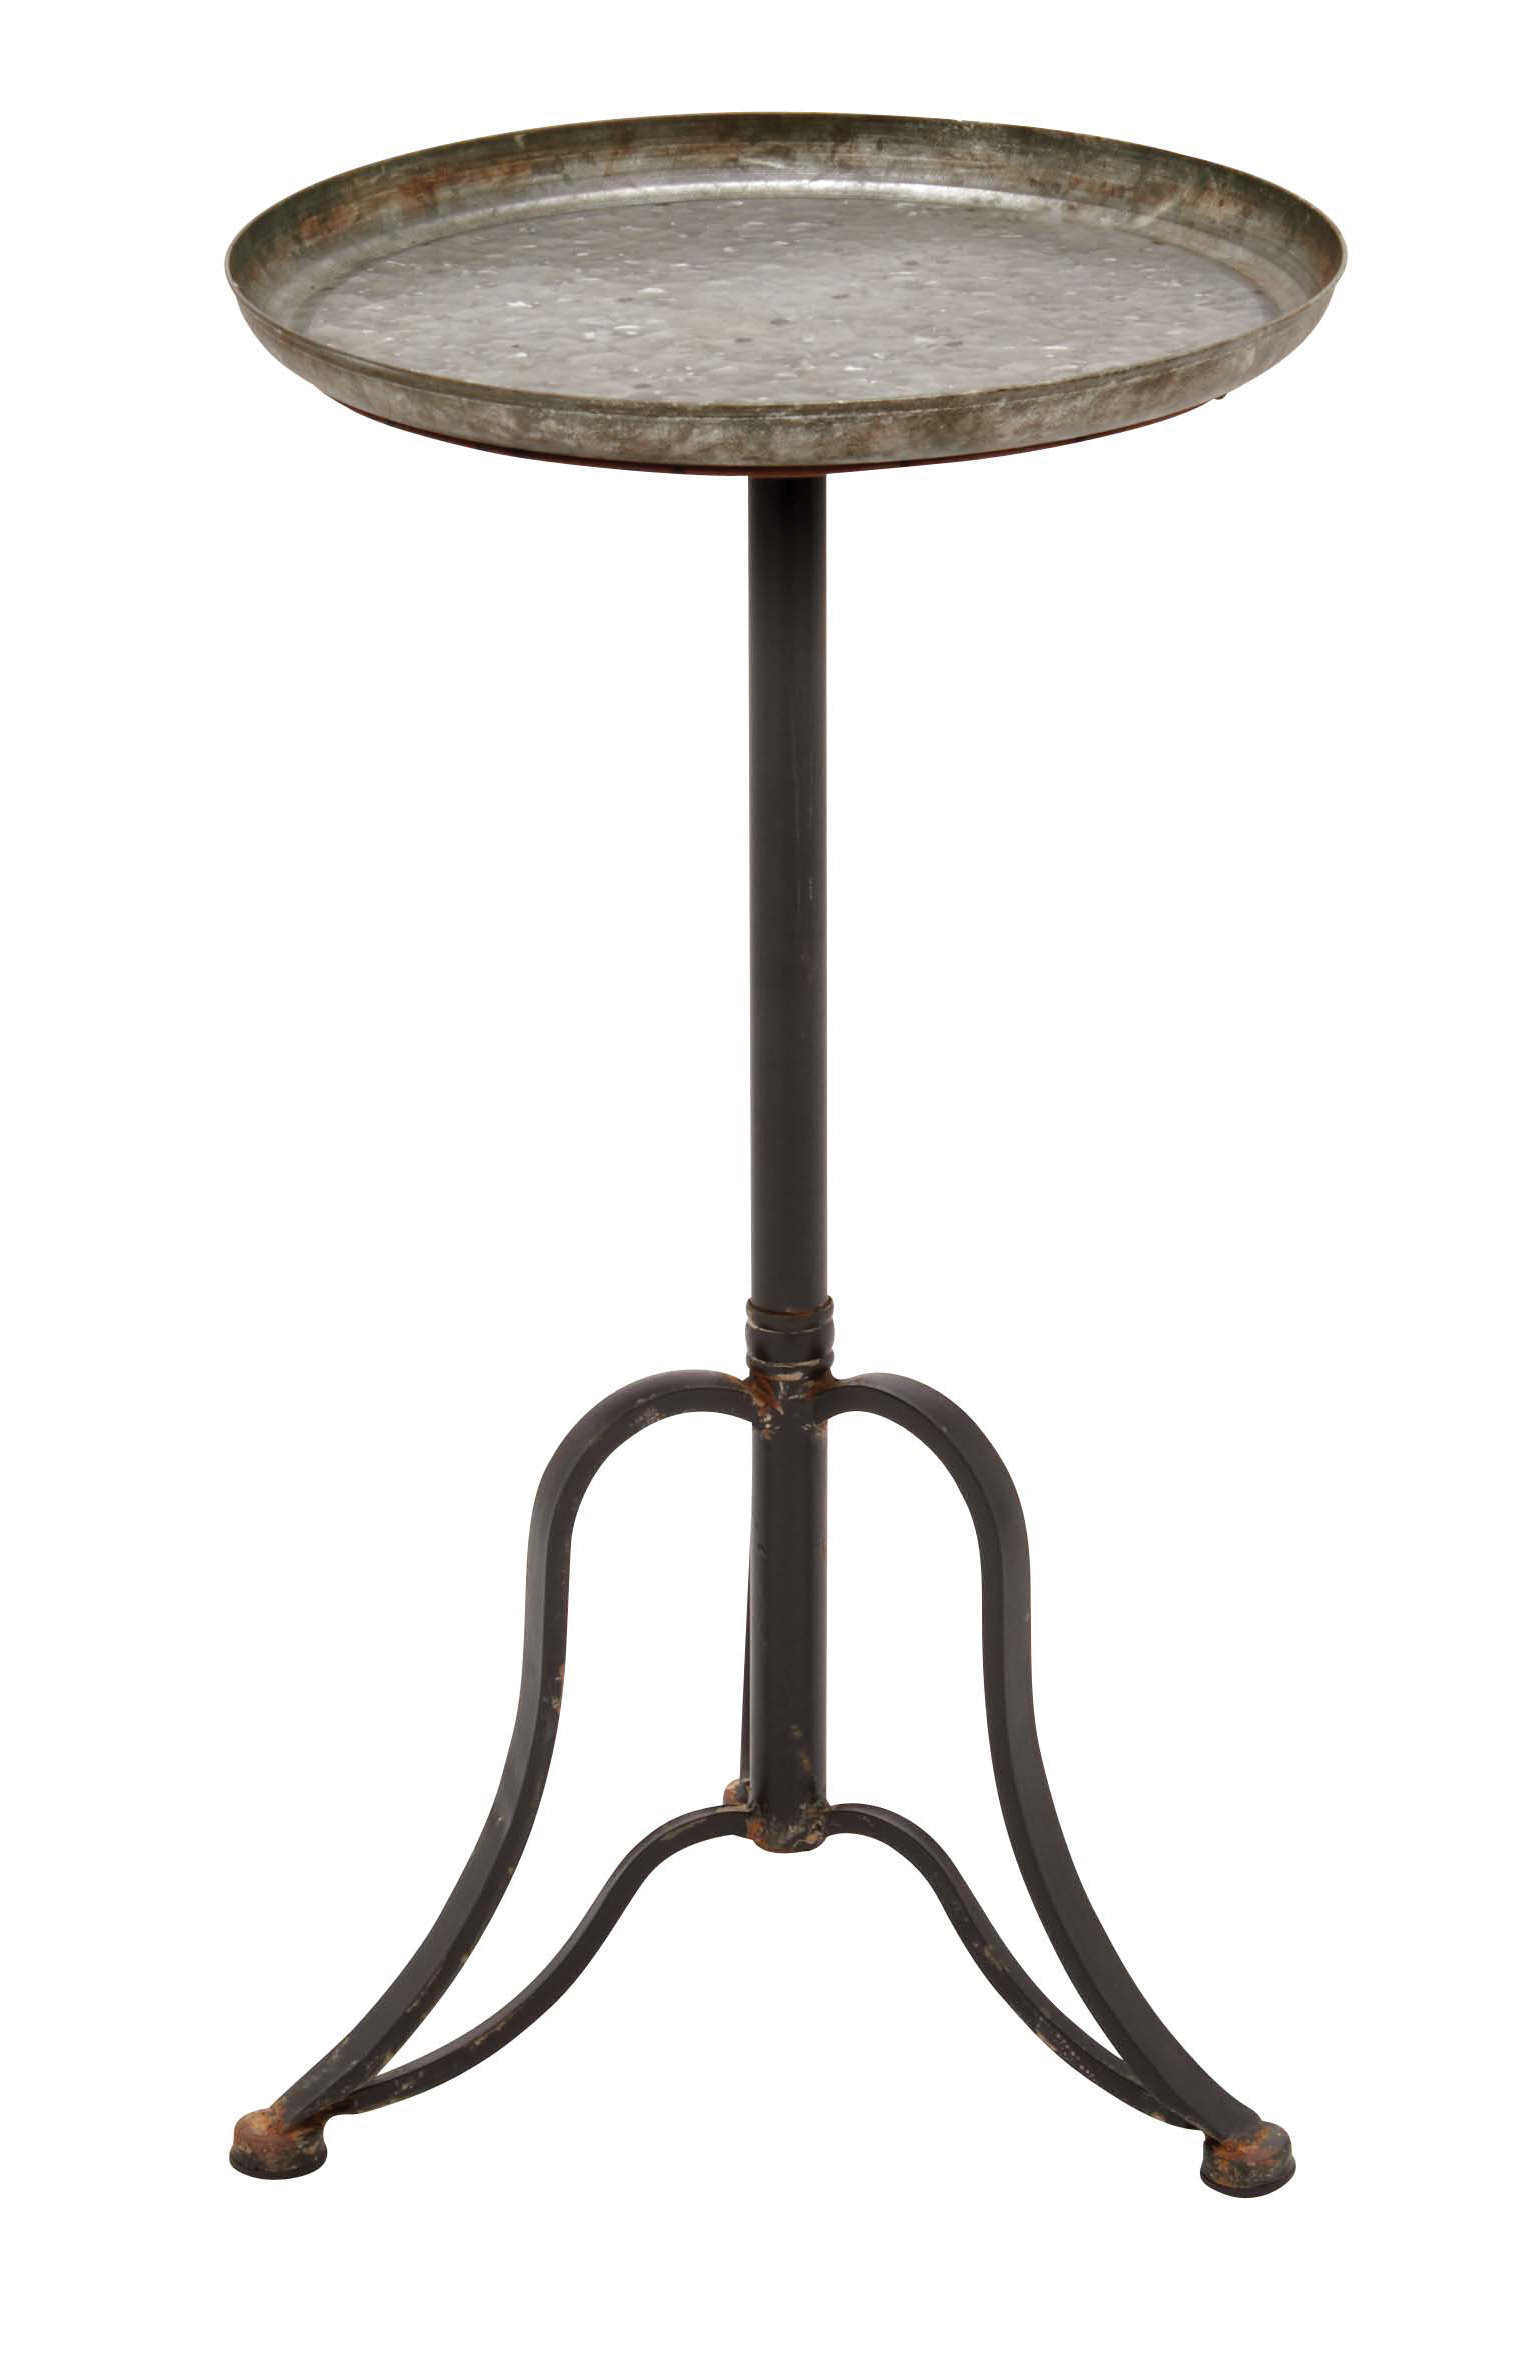 fabulous metal end table tenpojin pearl knurl nesting accent tables small console with storage verizon ellipsis round coffee stools unique outdoor patio mirrored elm side acrylic